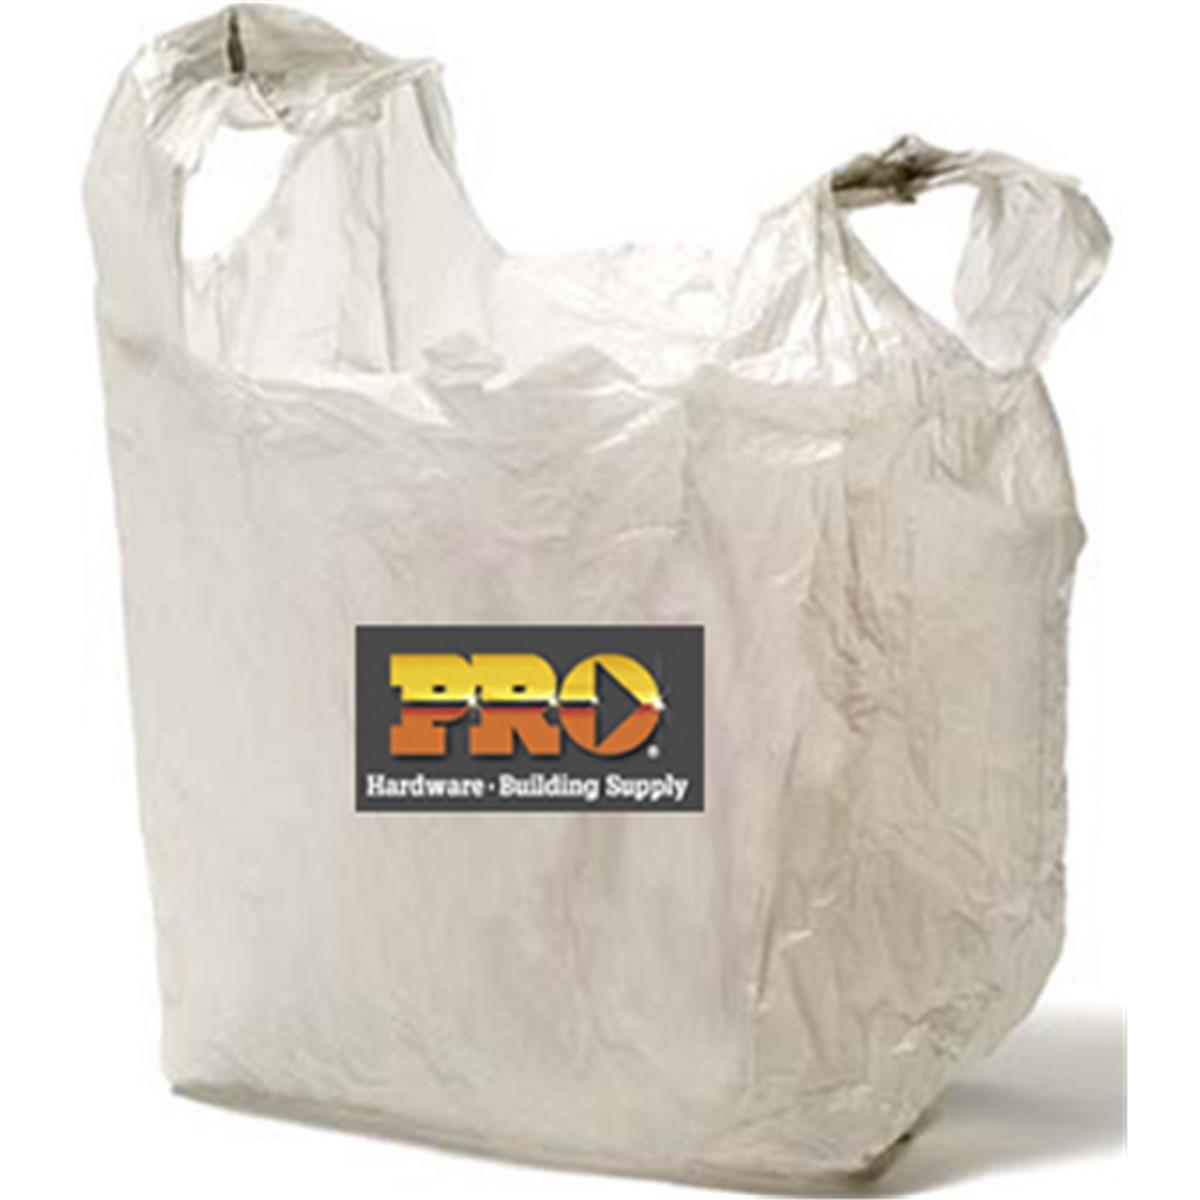 Picture of Hilex Poly 8035433 Rollmate Large Pro Plastic Bags - 1600 Count